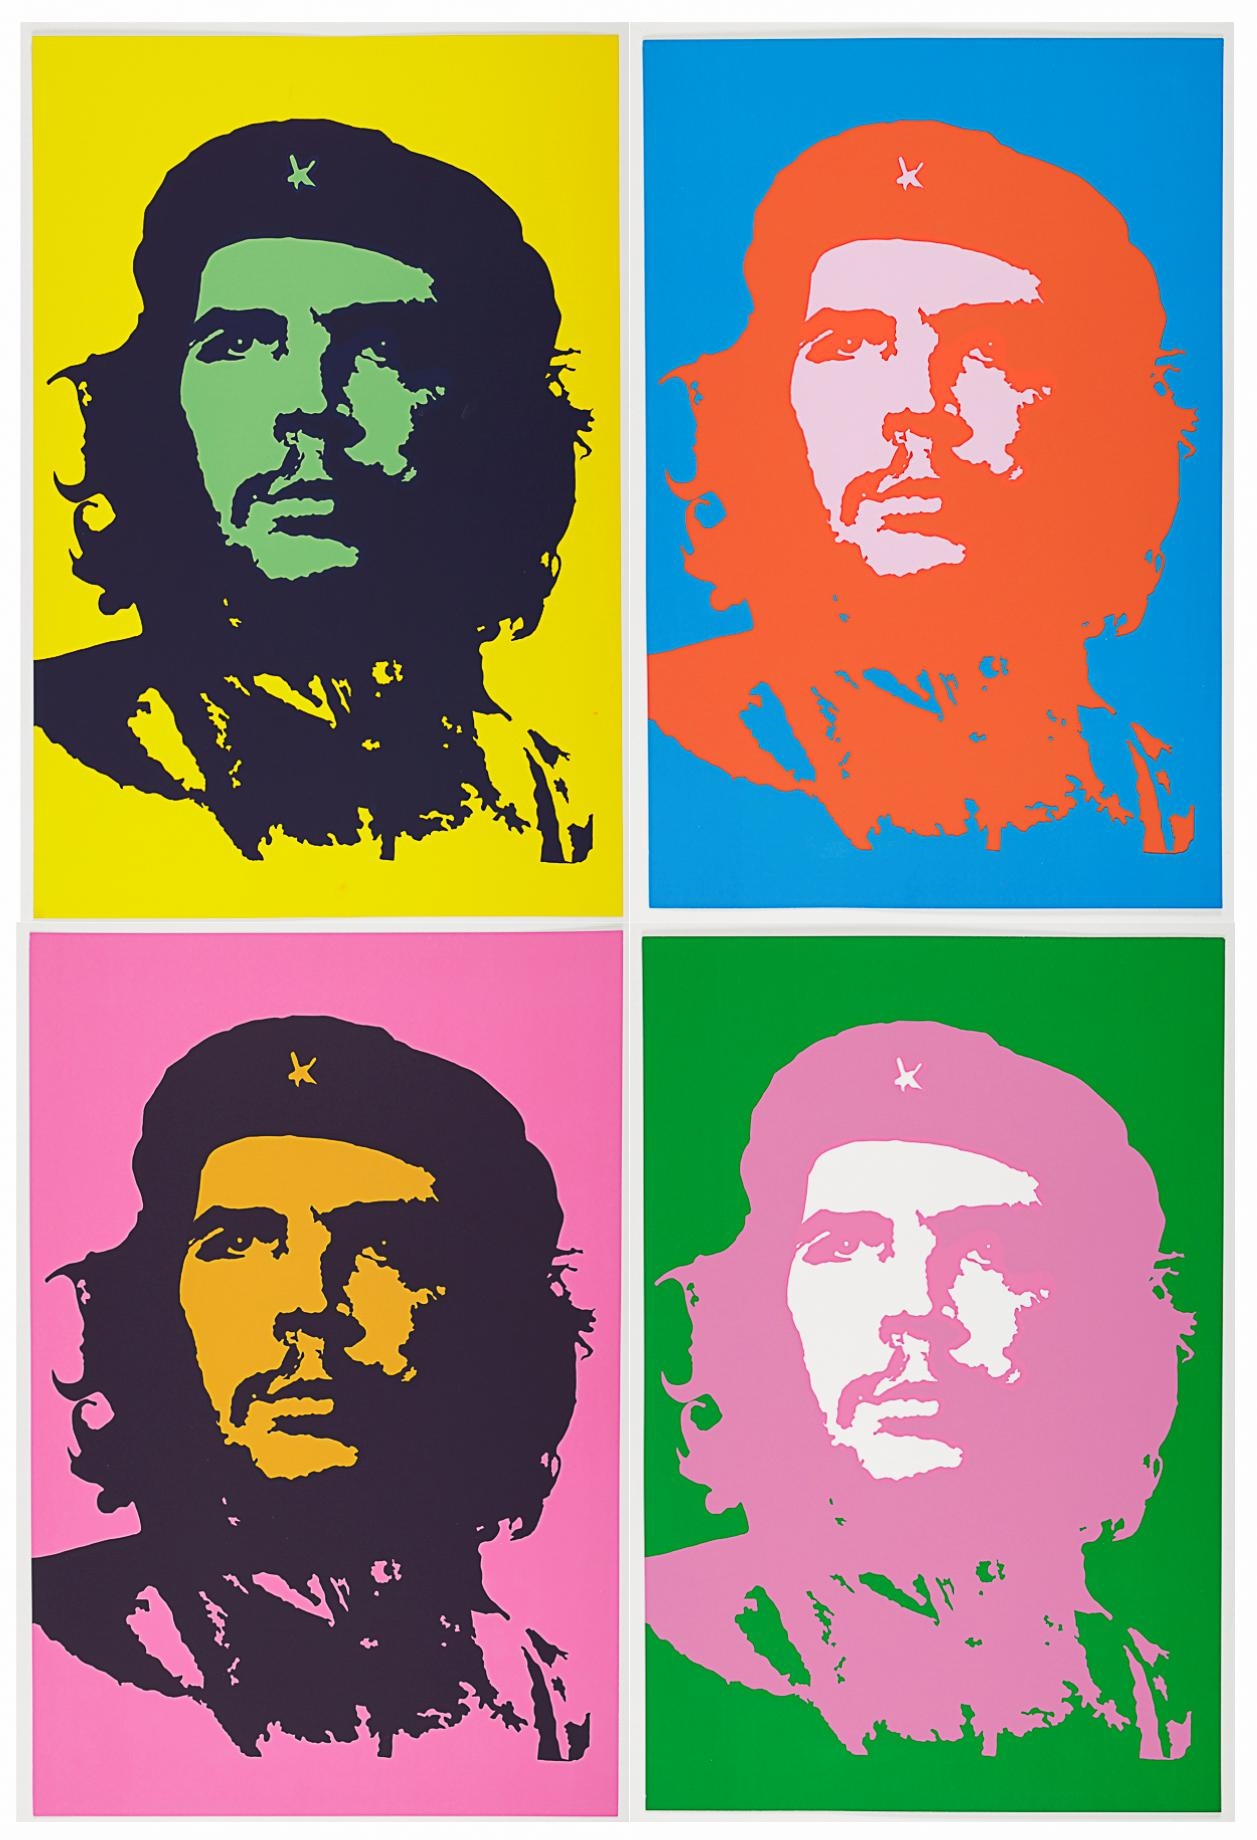 Artwork by Andy Warhol, Che Guevara, Made of color screen print on light cardboard